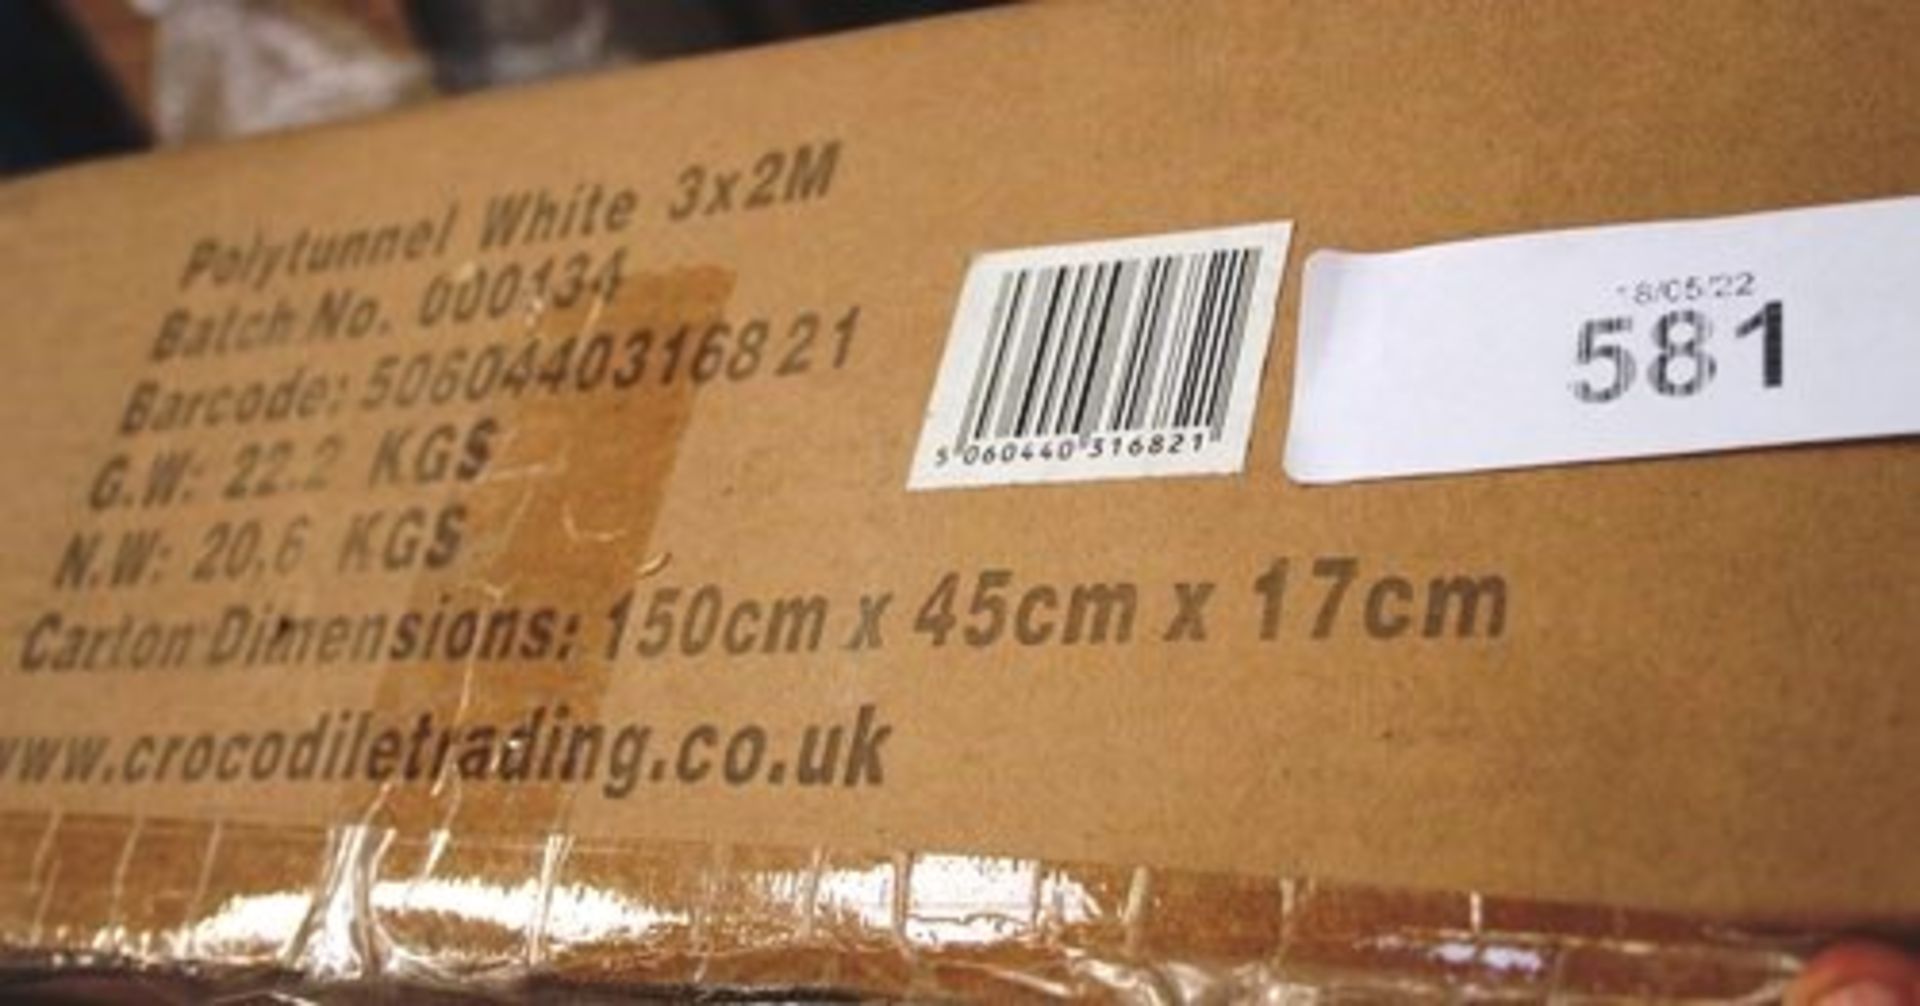 1 x Crocodile Trading white 3 x 2m poly tunnel - New in box (GS20end)